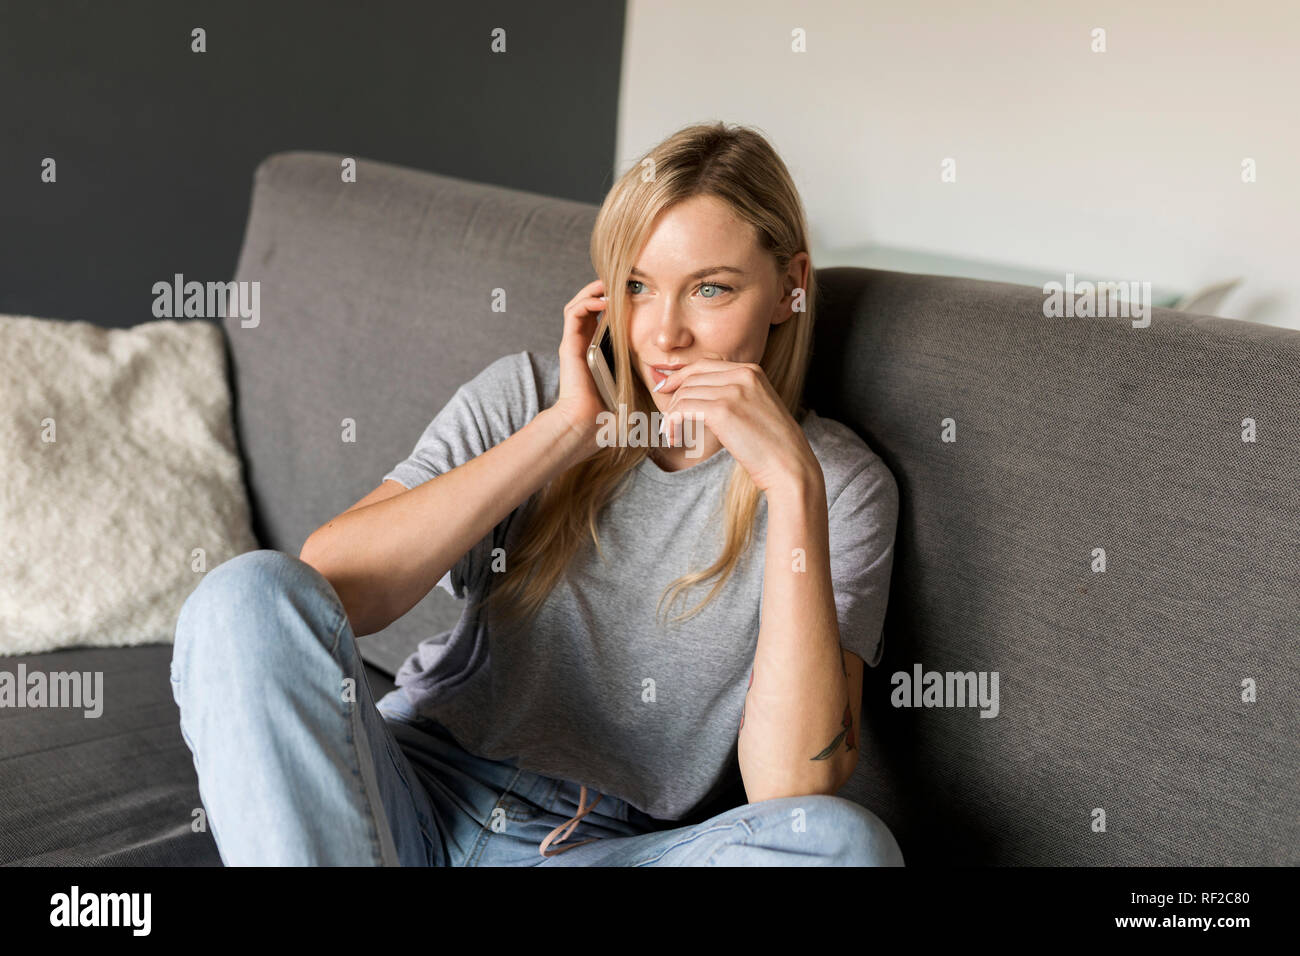 Smiling young woman sitting on couch talking on cell phone Banque D'Images